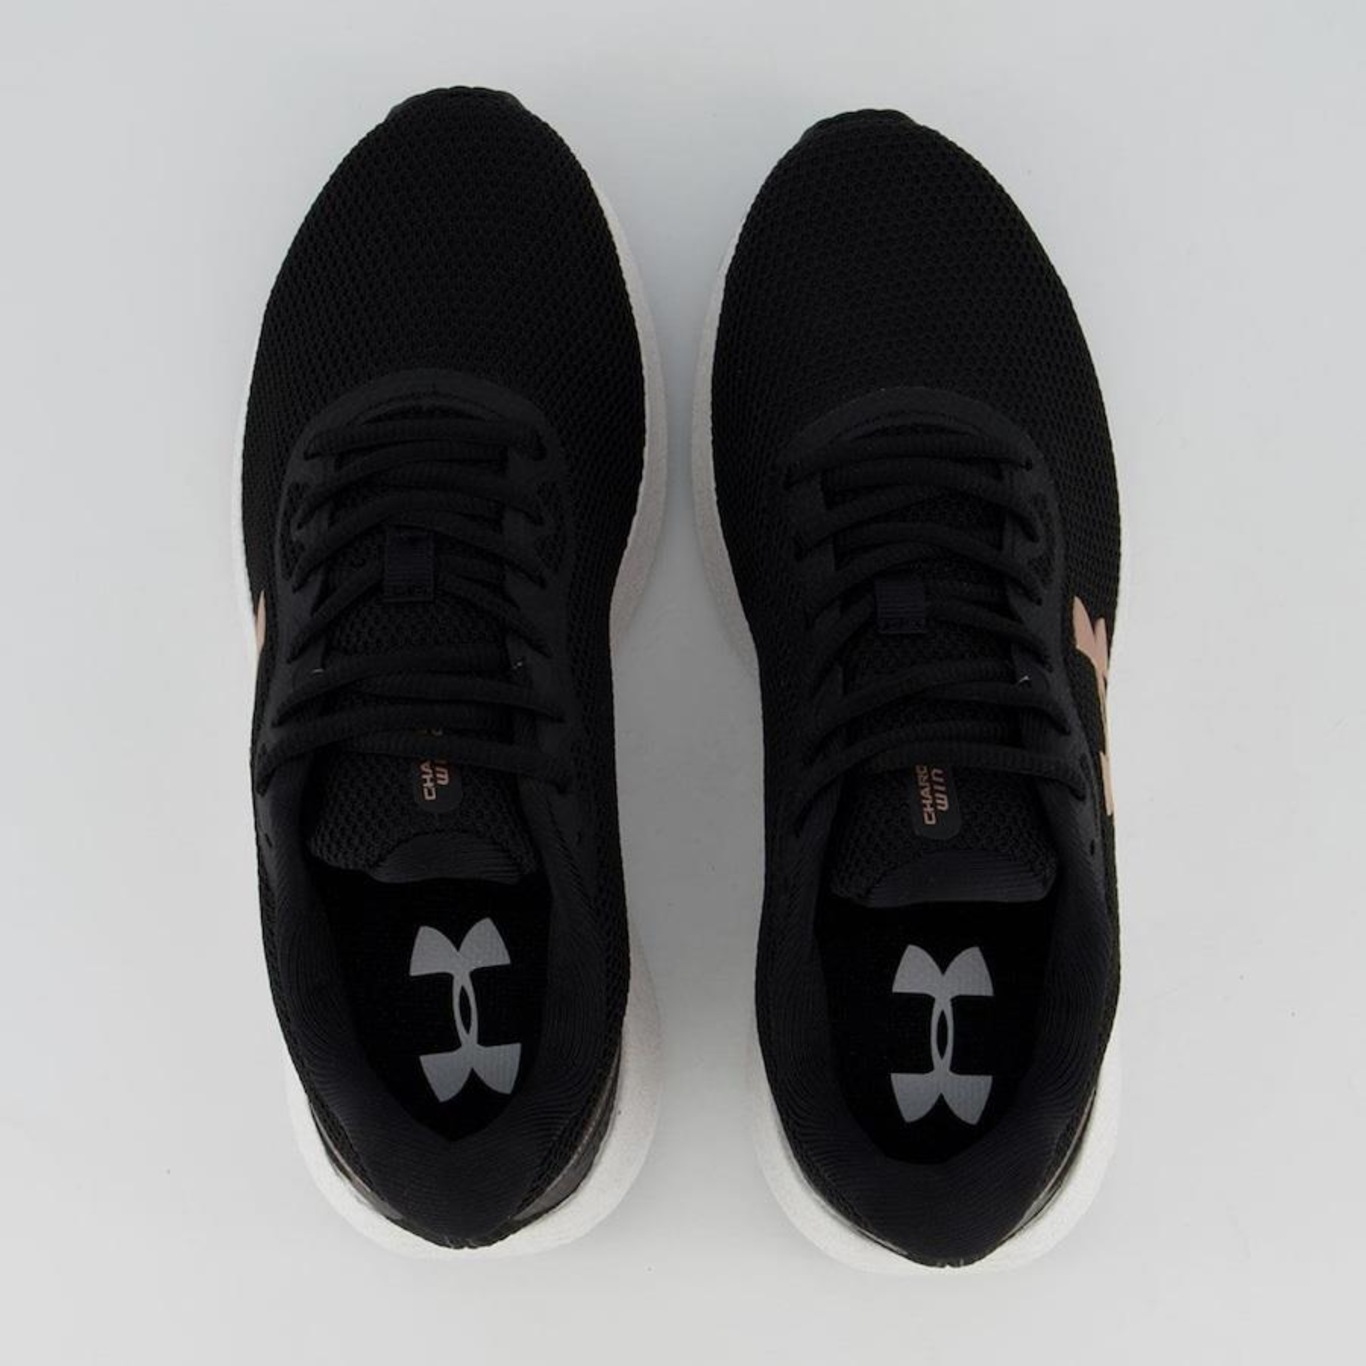 Tênis Under Armour Charged Wing - Feminino - Foto 4